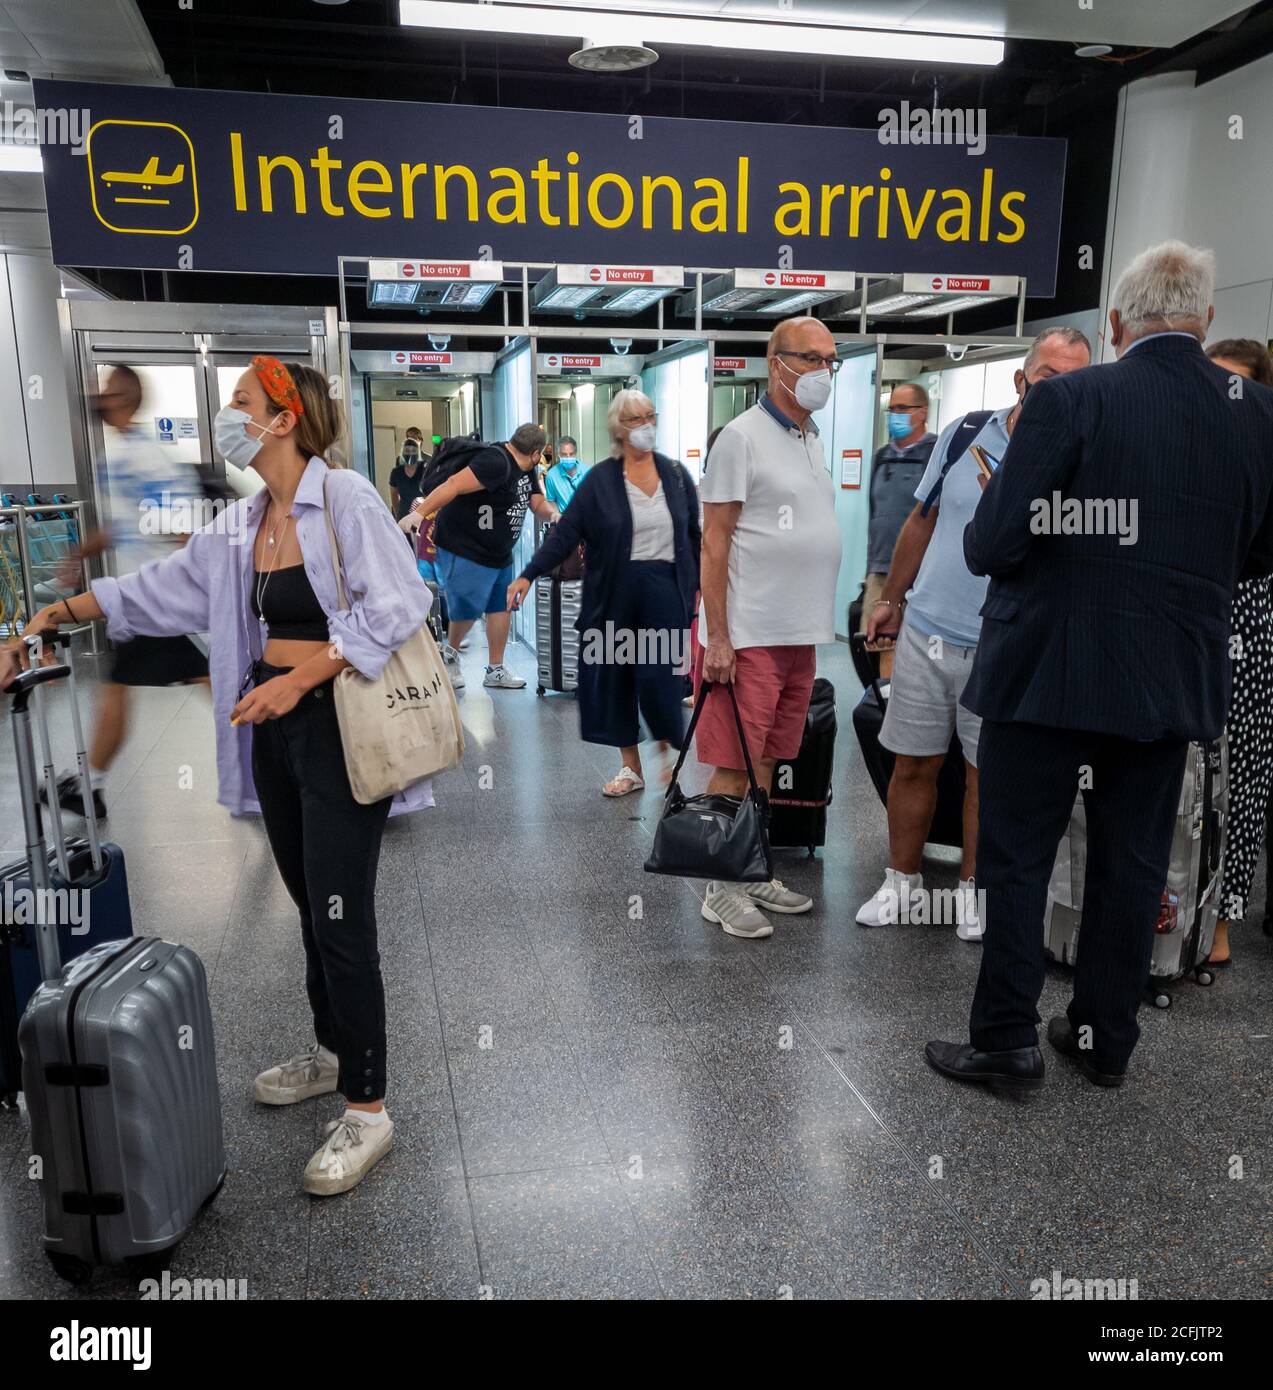 Air passengers emerging from the international arrivals gates in Gatwick airport north terminal. Stock Photo